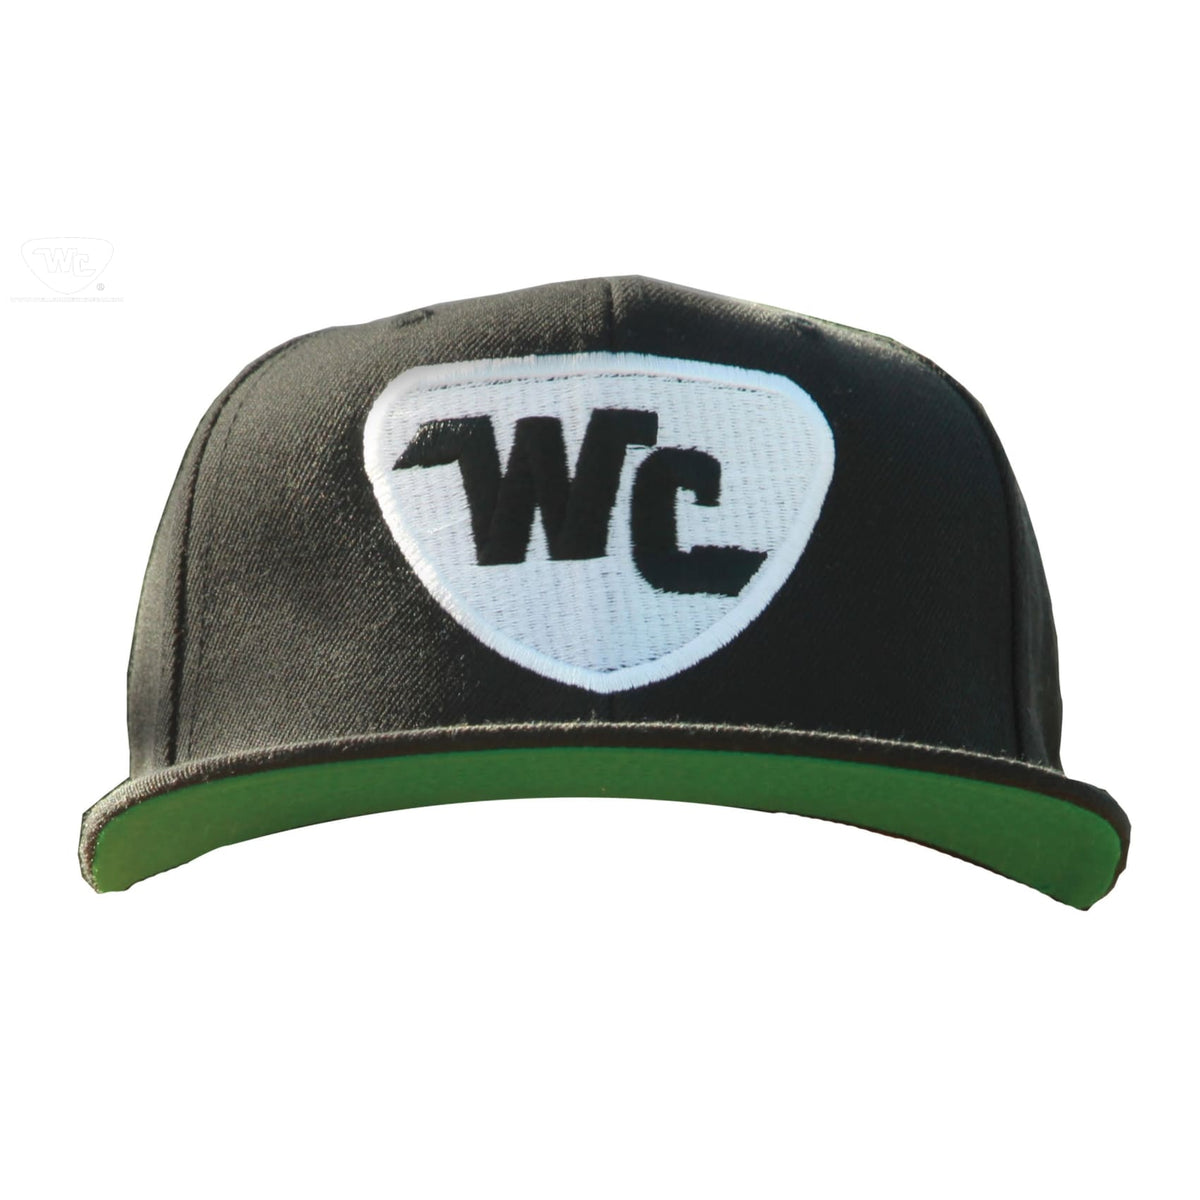 Cap Connected - Lifestyle (Black) Snapback Well Gear